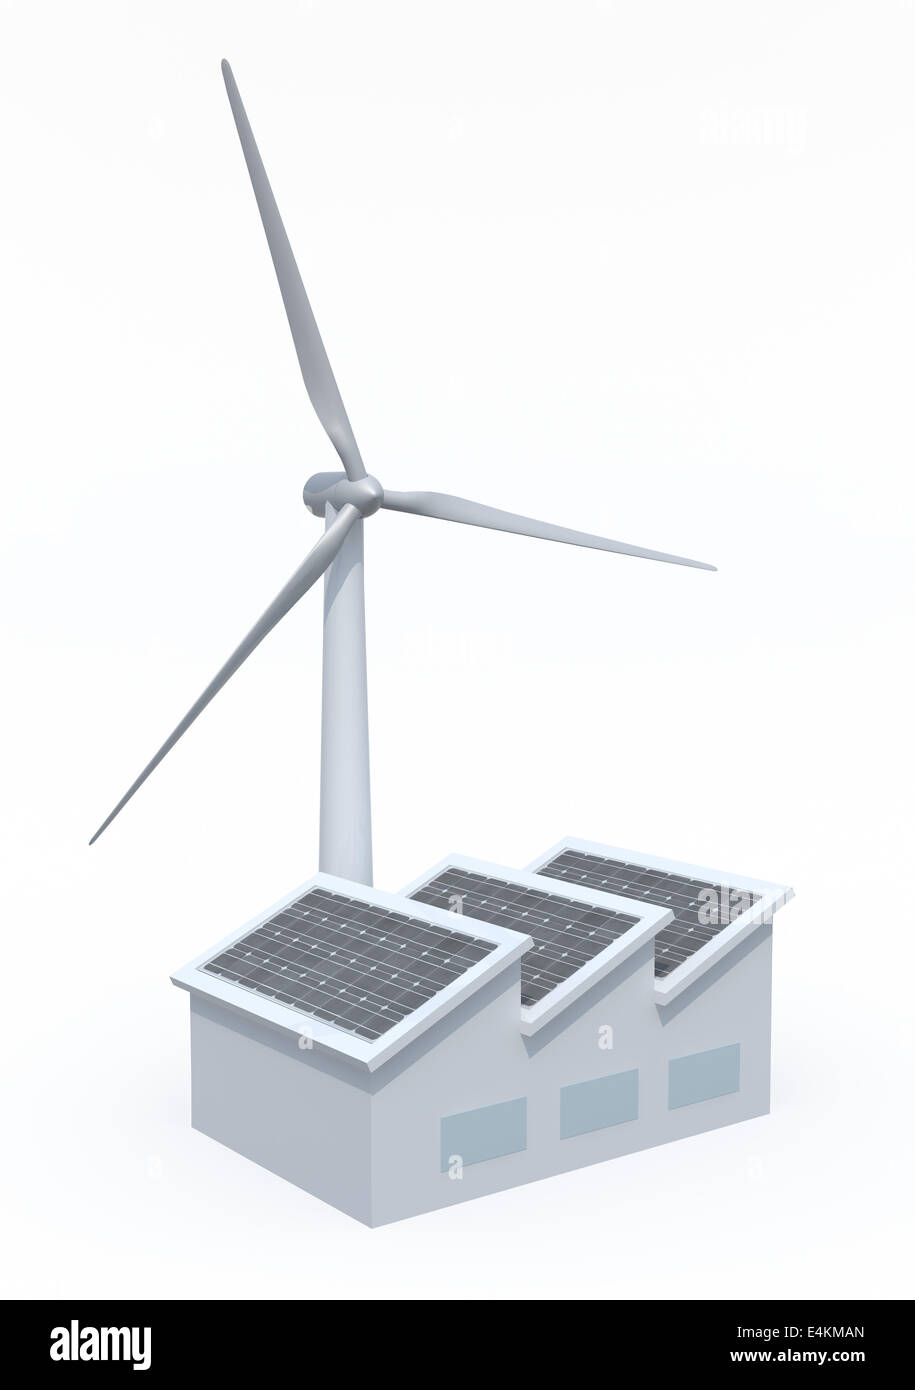 factory with solar panels and wind turbine instead of the chimney, 3d illustration on white background Stock Photo